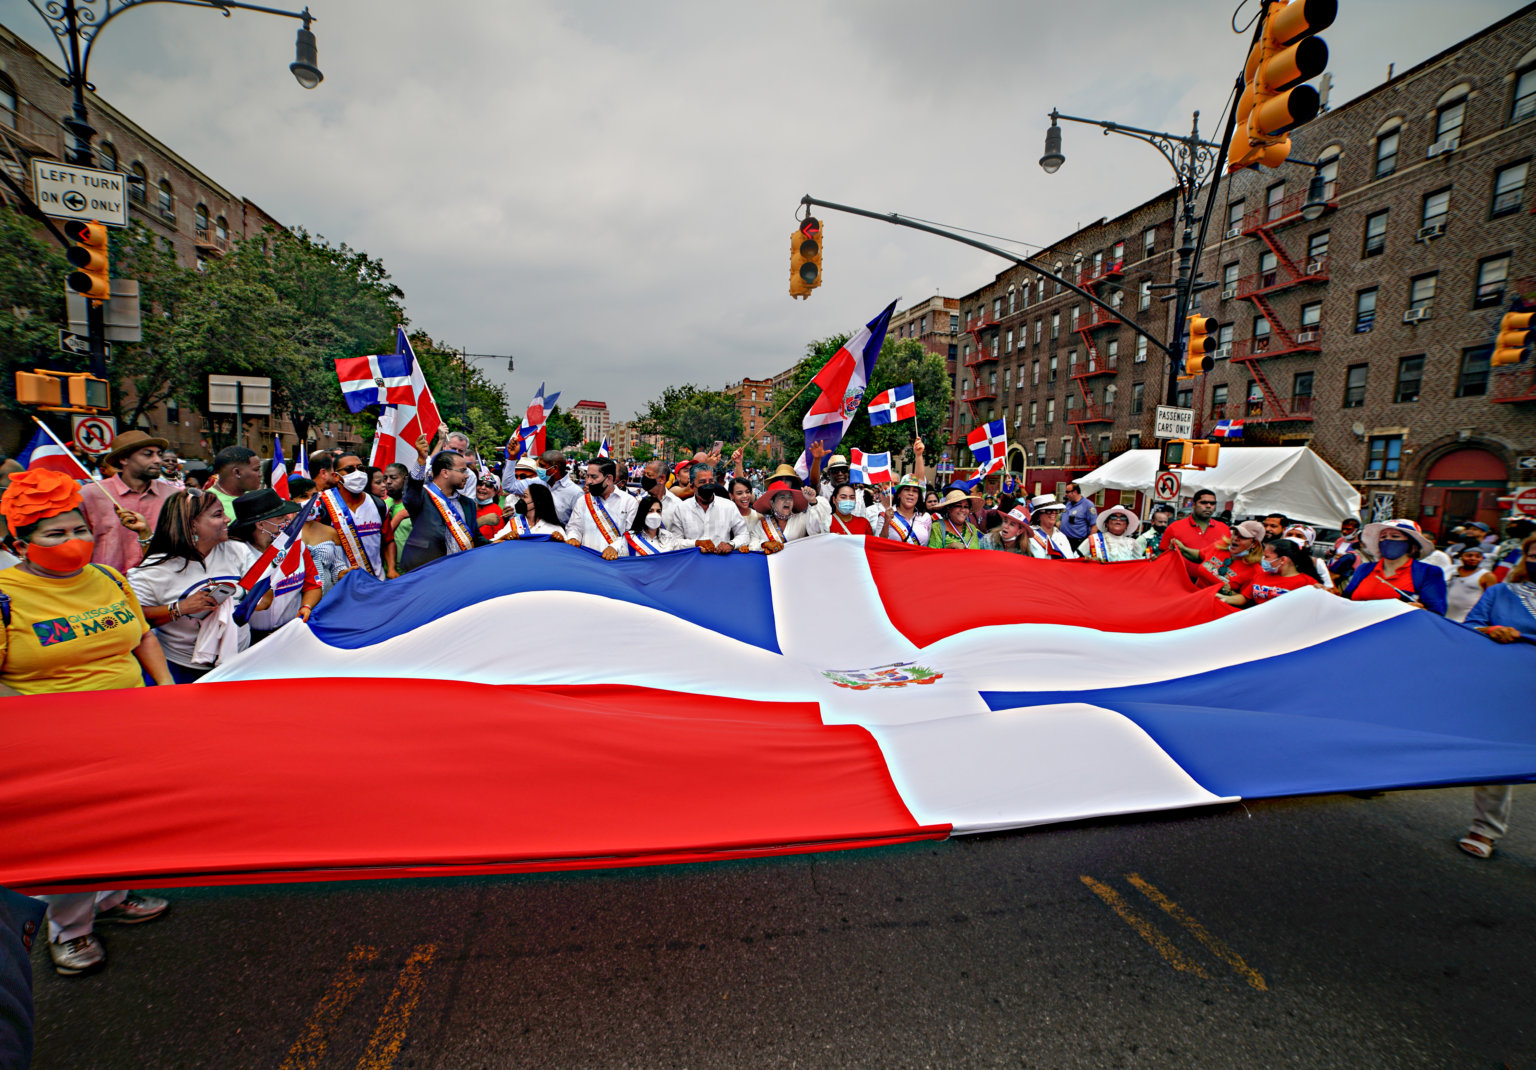 Bronx Dominican Day Parade brings hundreds of spectators and political